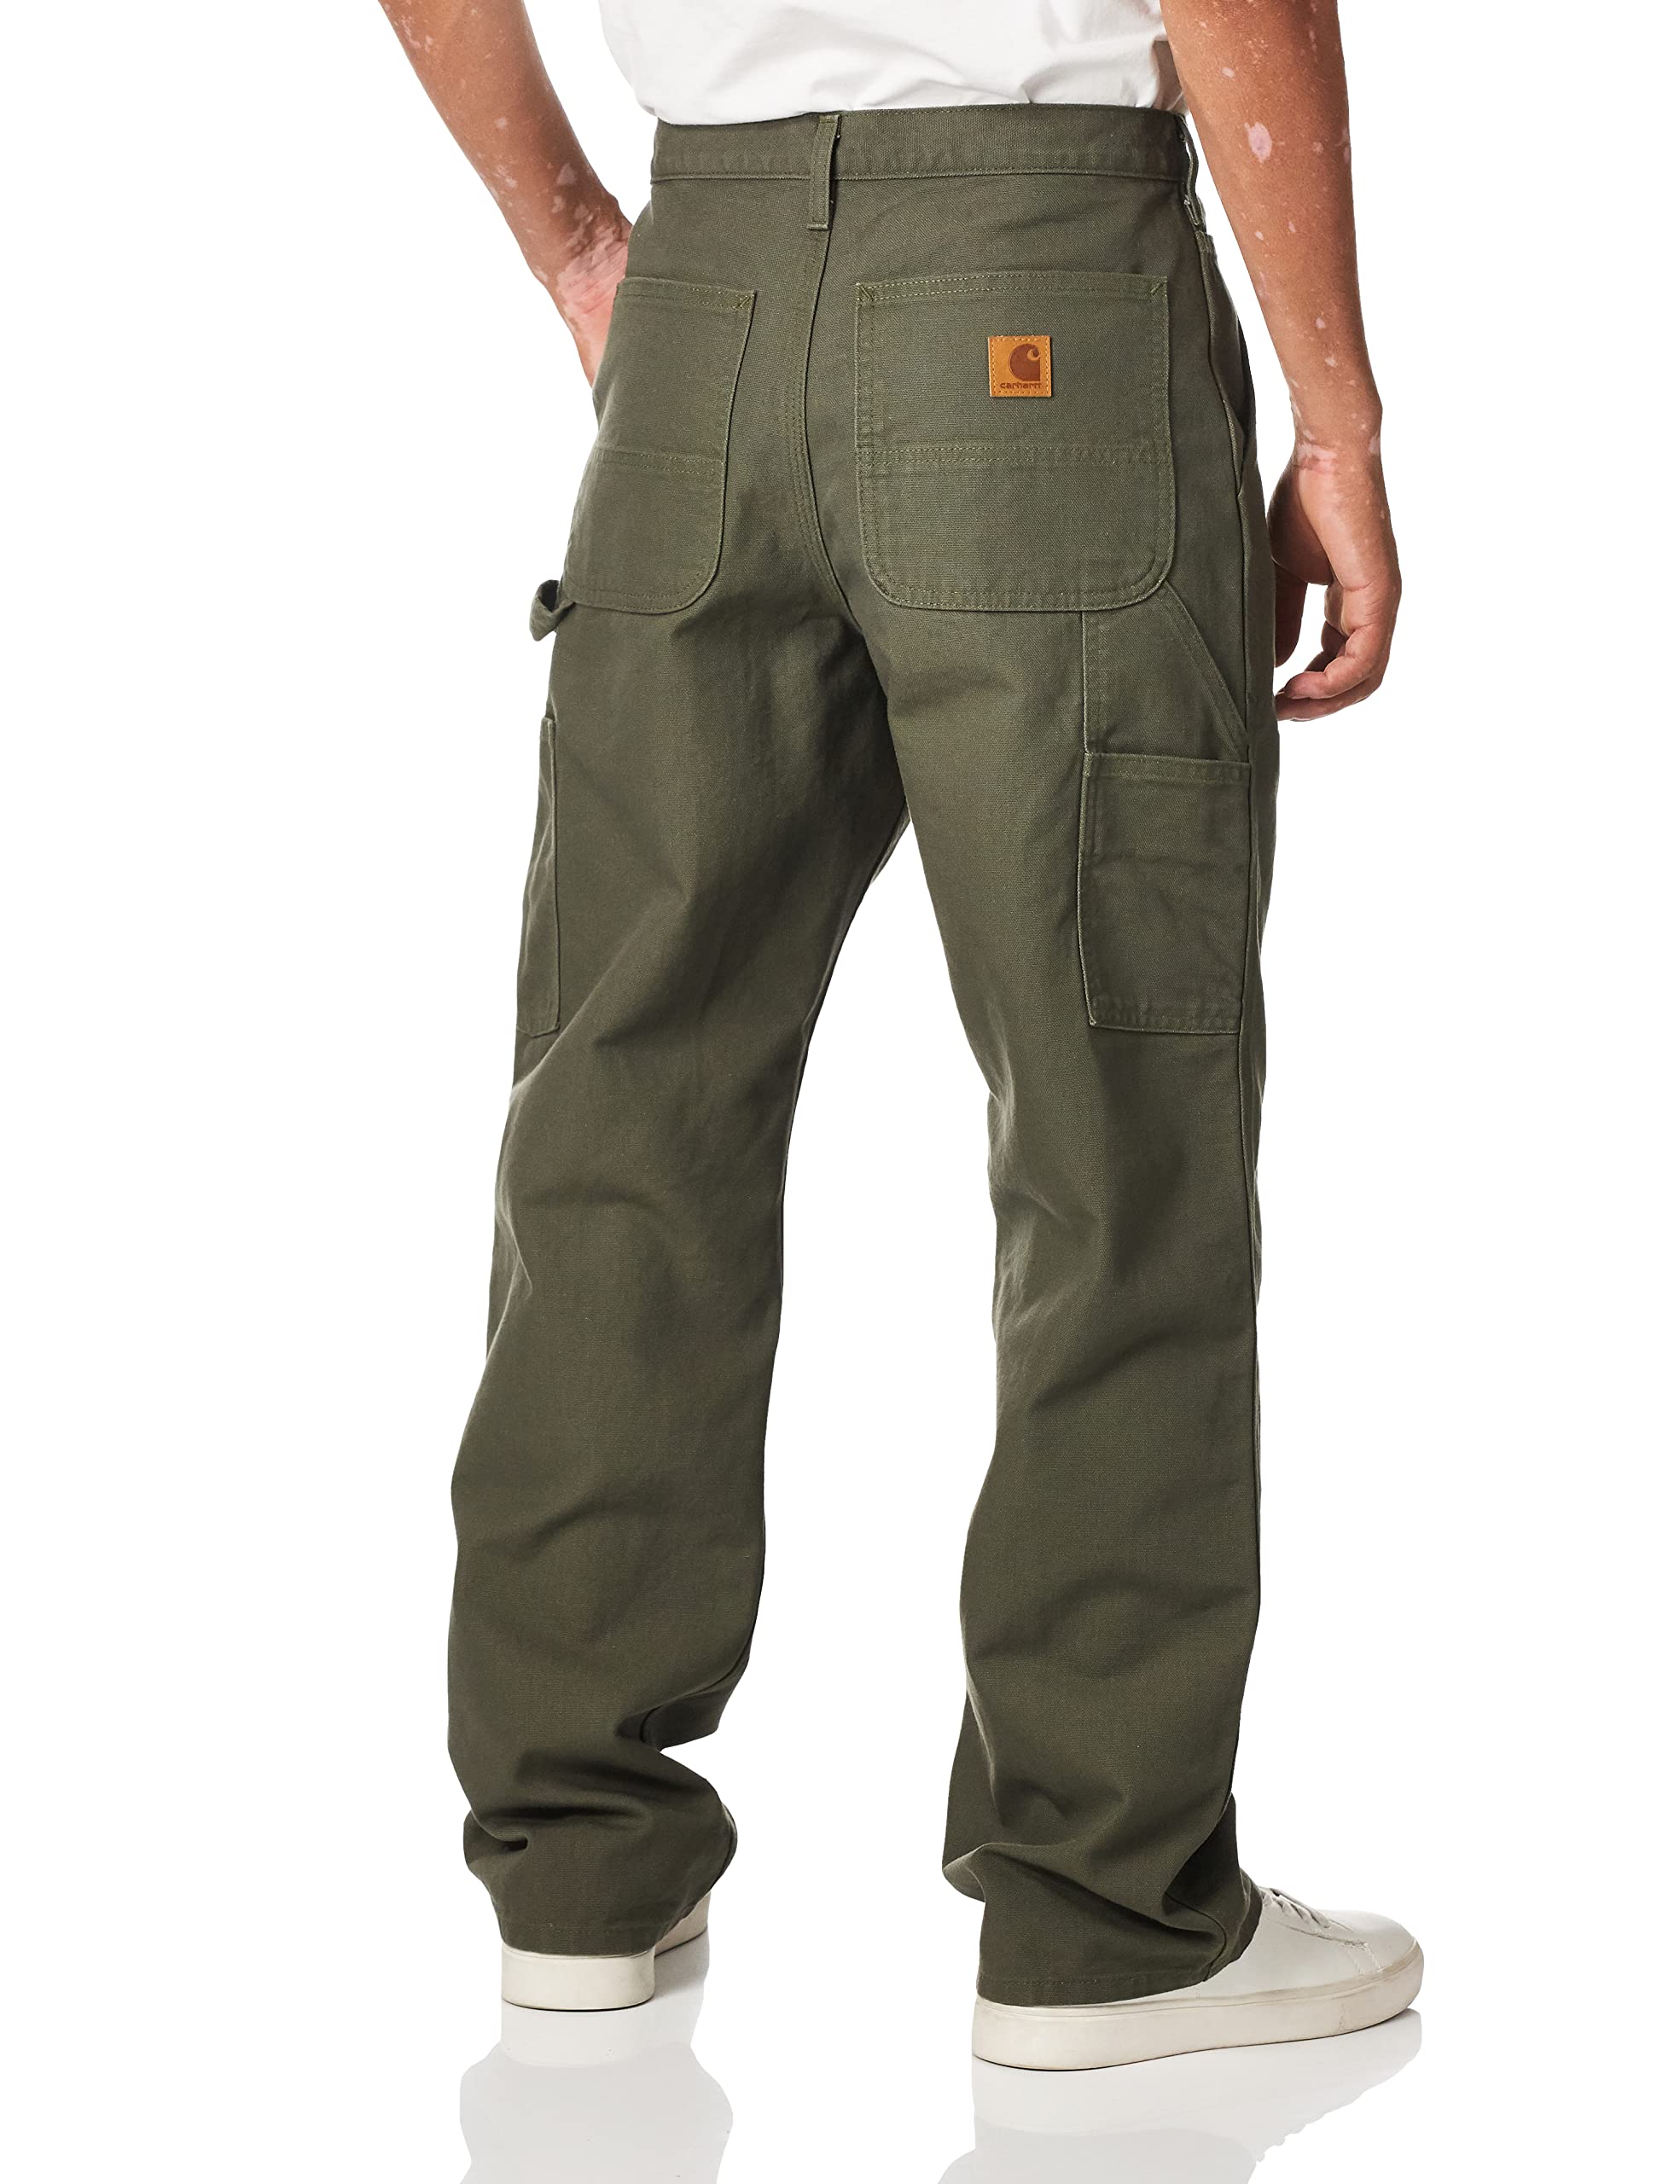 Carhartt Loose Fit Washed Duck Flannel-Lined Utility Work Pants - B111 –  WORK N WEAR